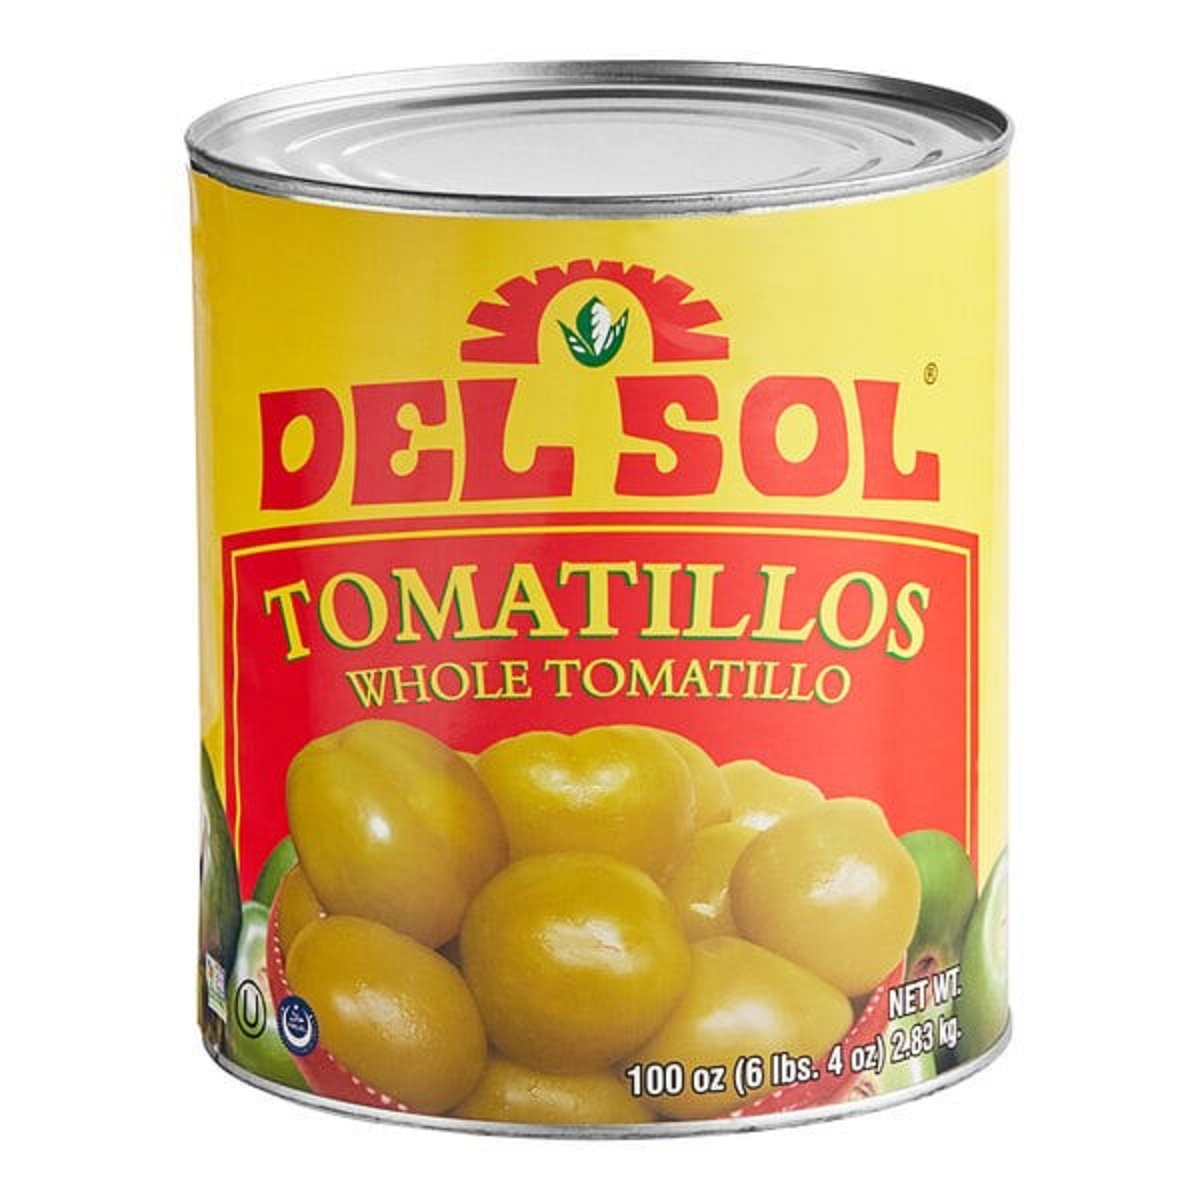 DEL SOL TOMATILLO, WHOLE GREEN IN JUICE CANNED